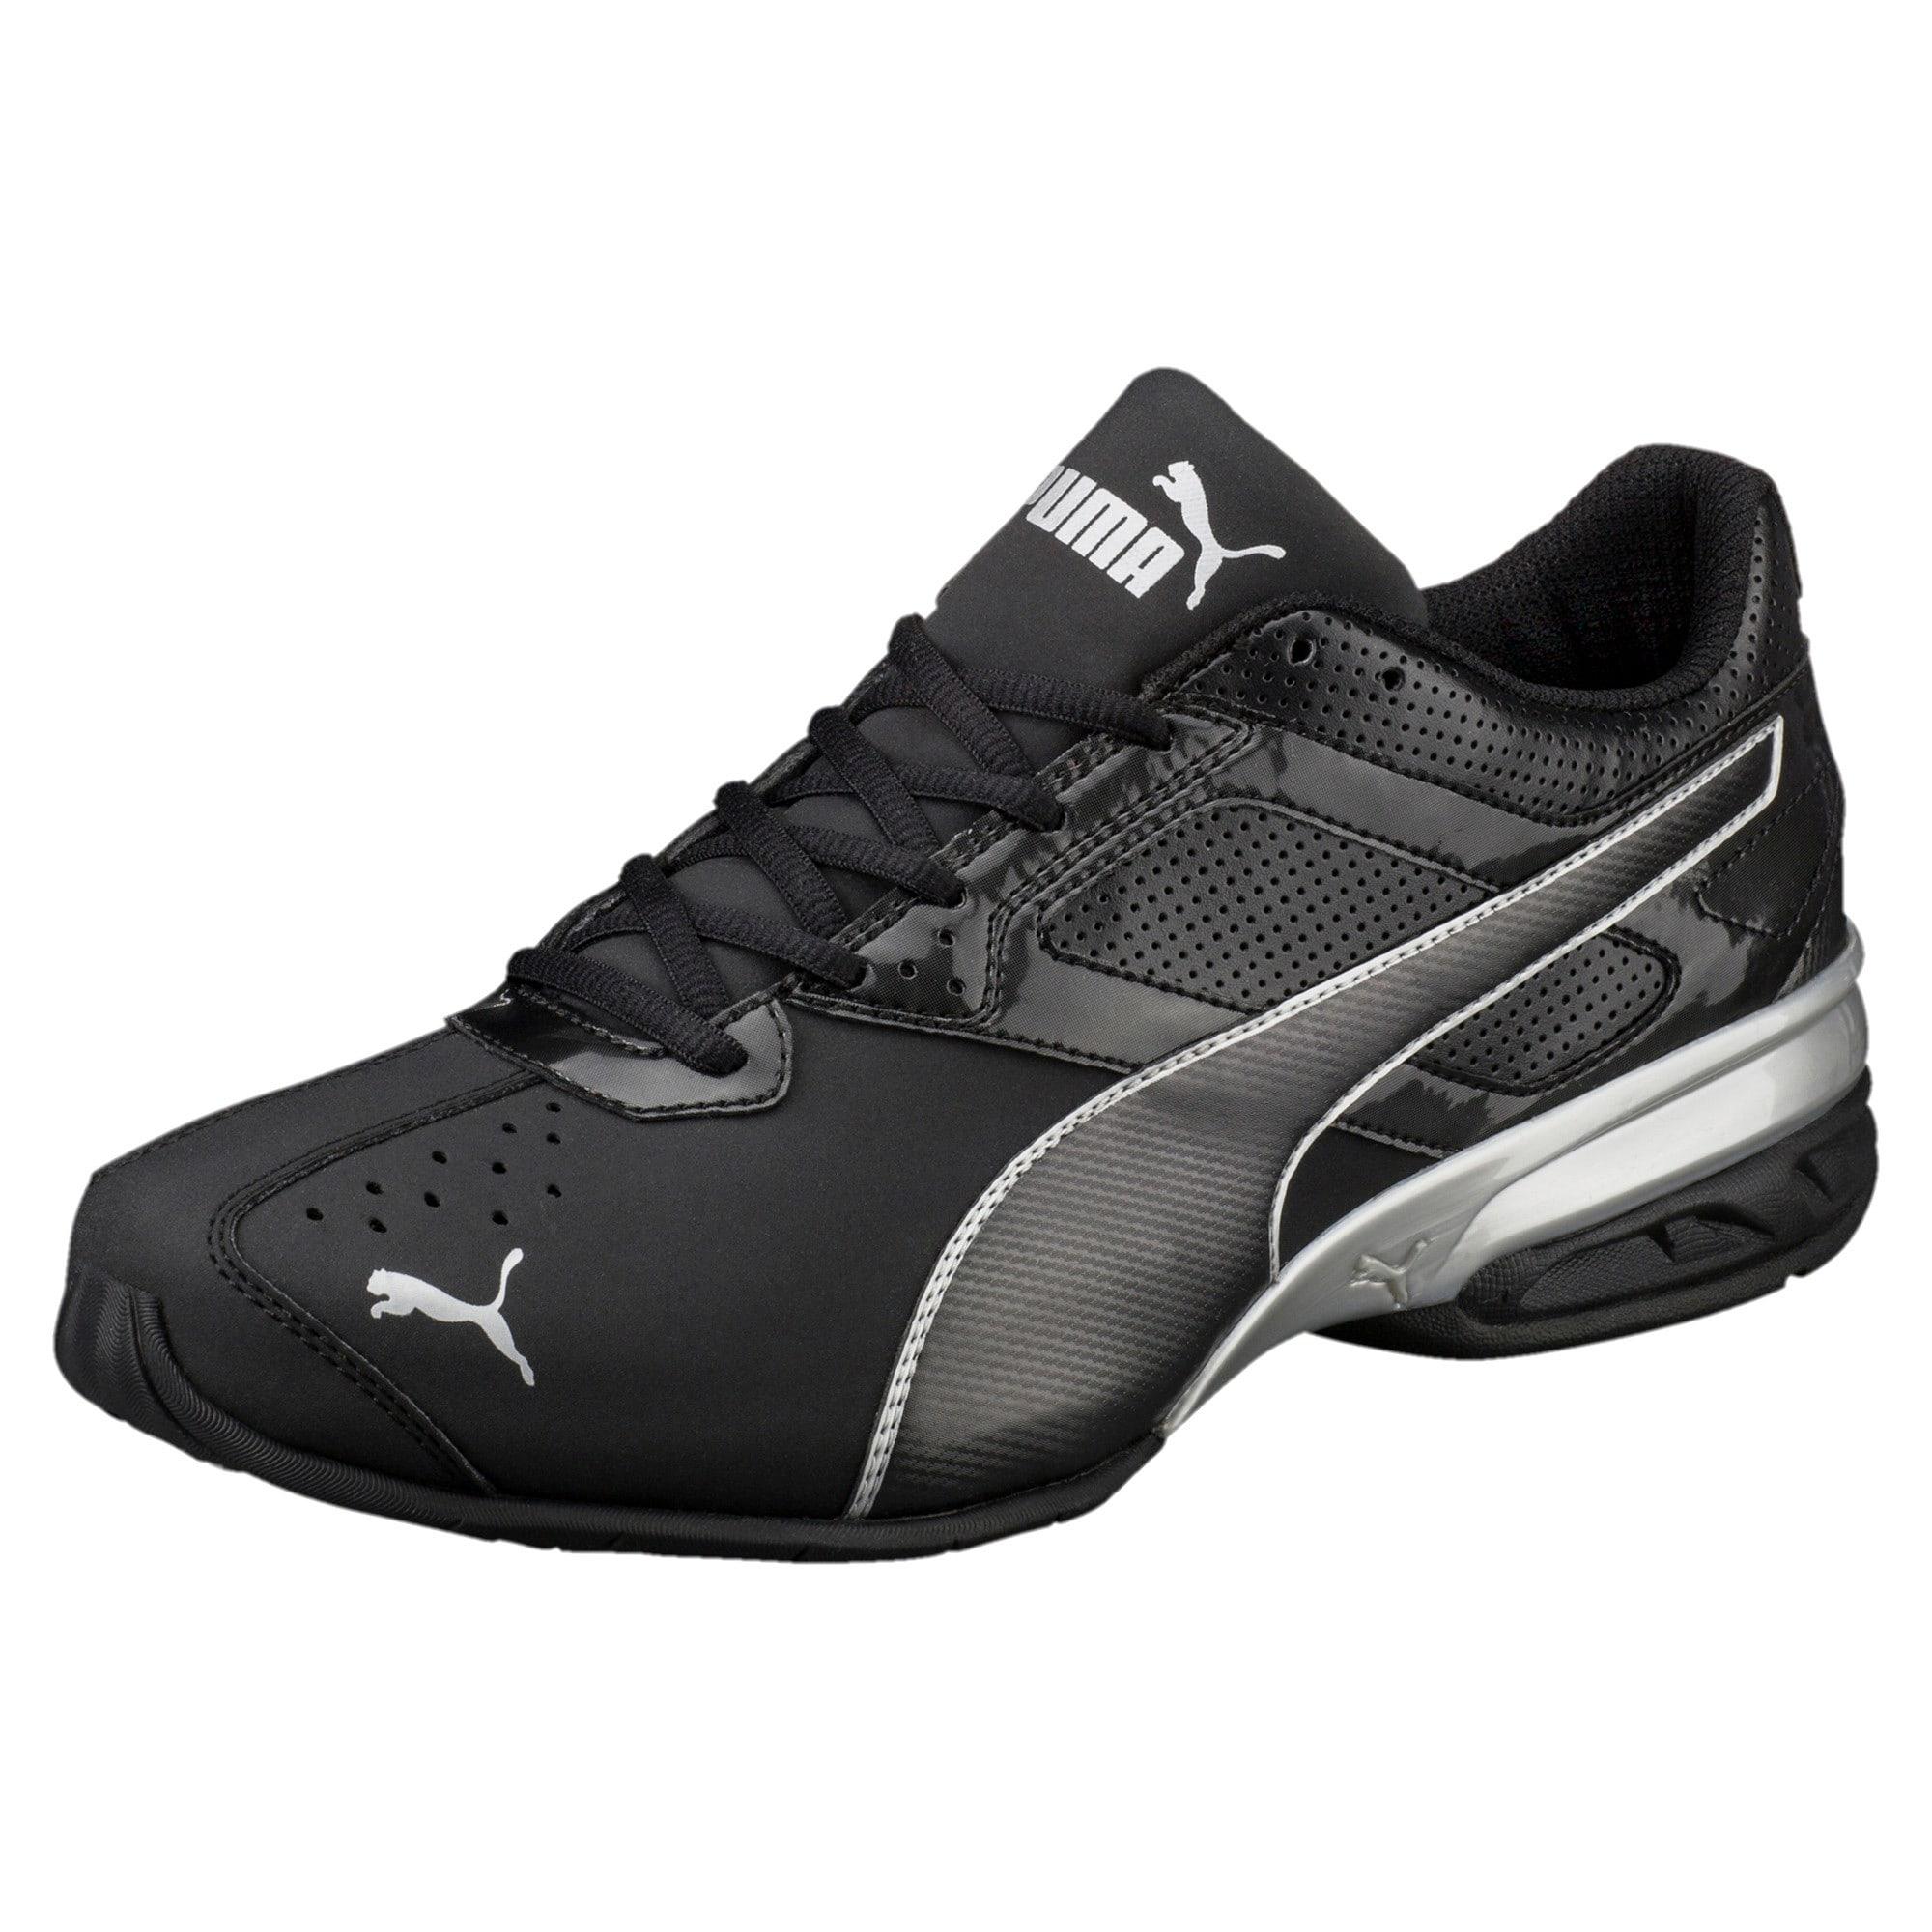 PUMA Synthetic Trainers Black Tazon 6 Fm 189873/003 for Men - Save 34% ...